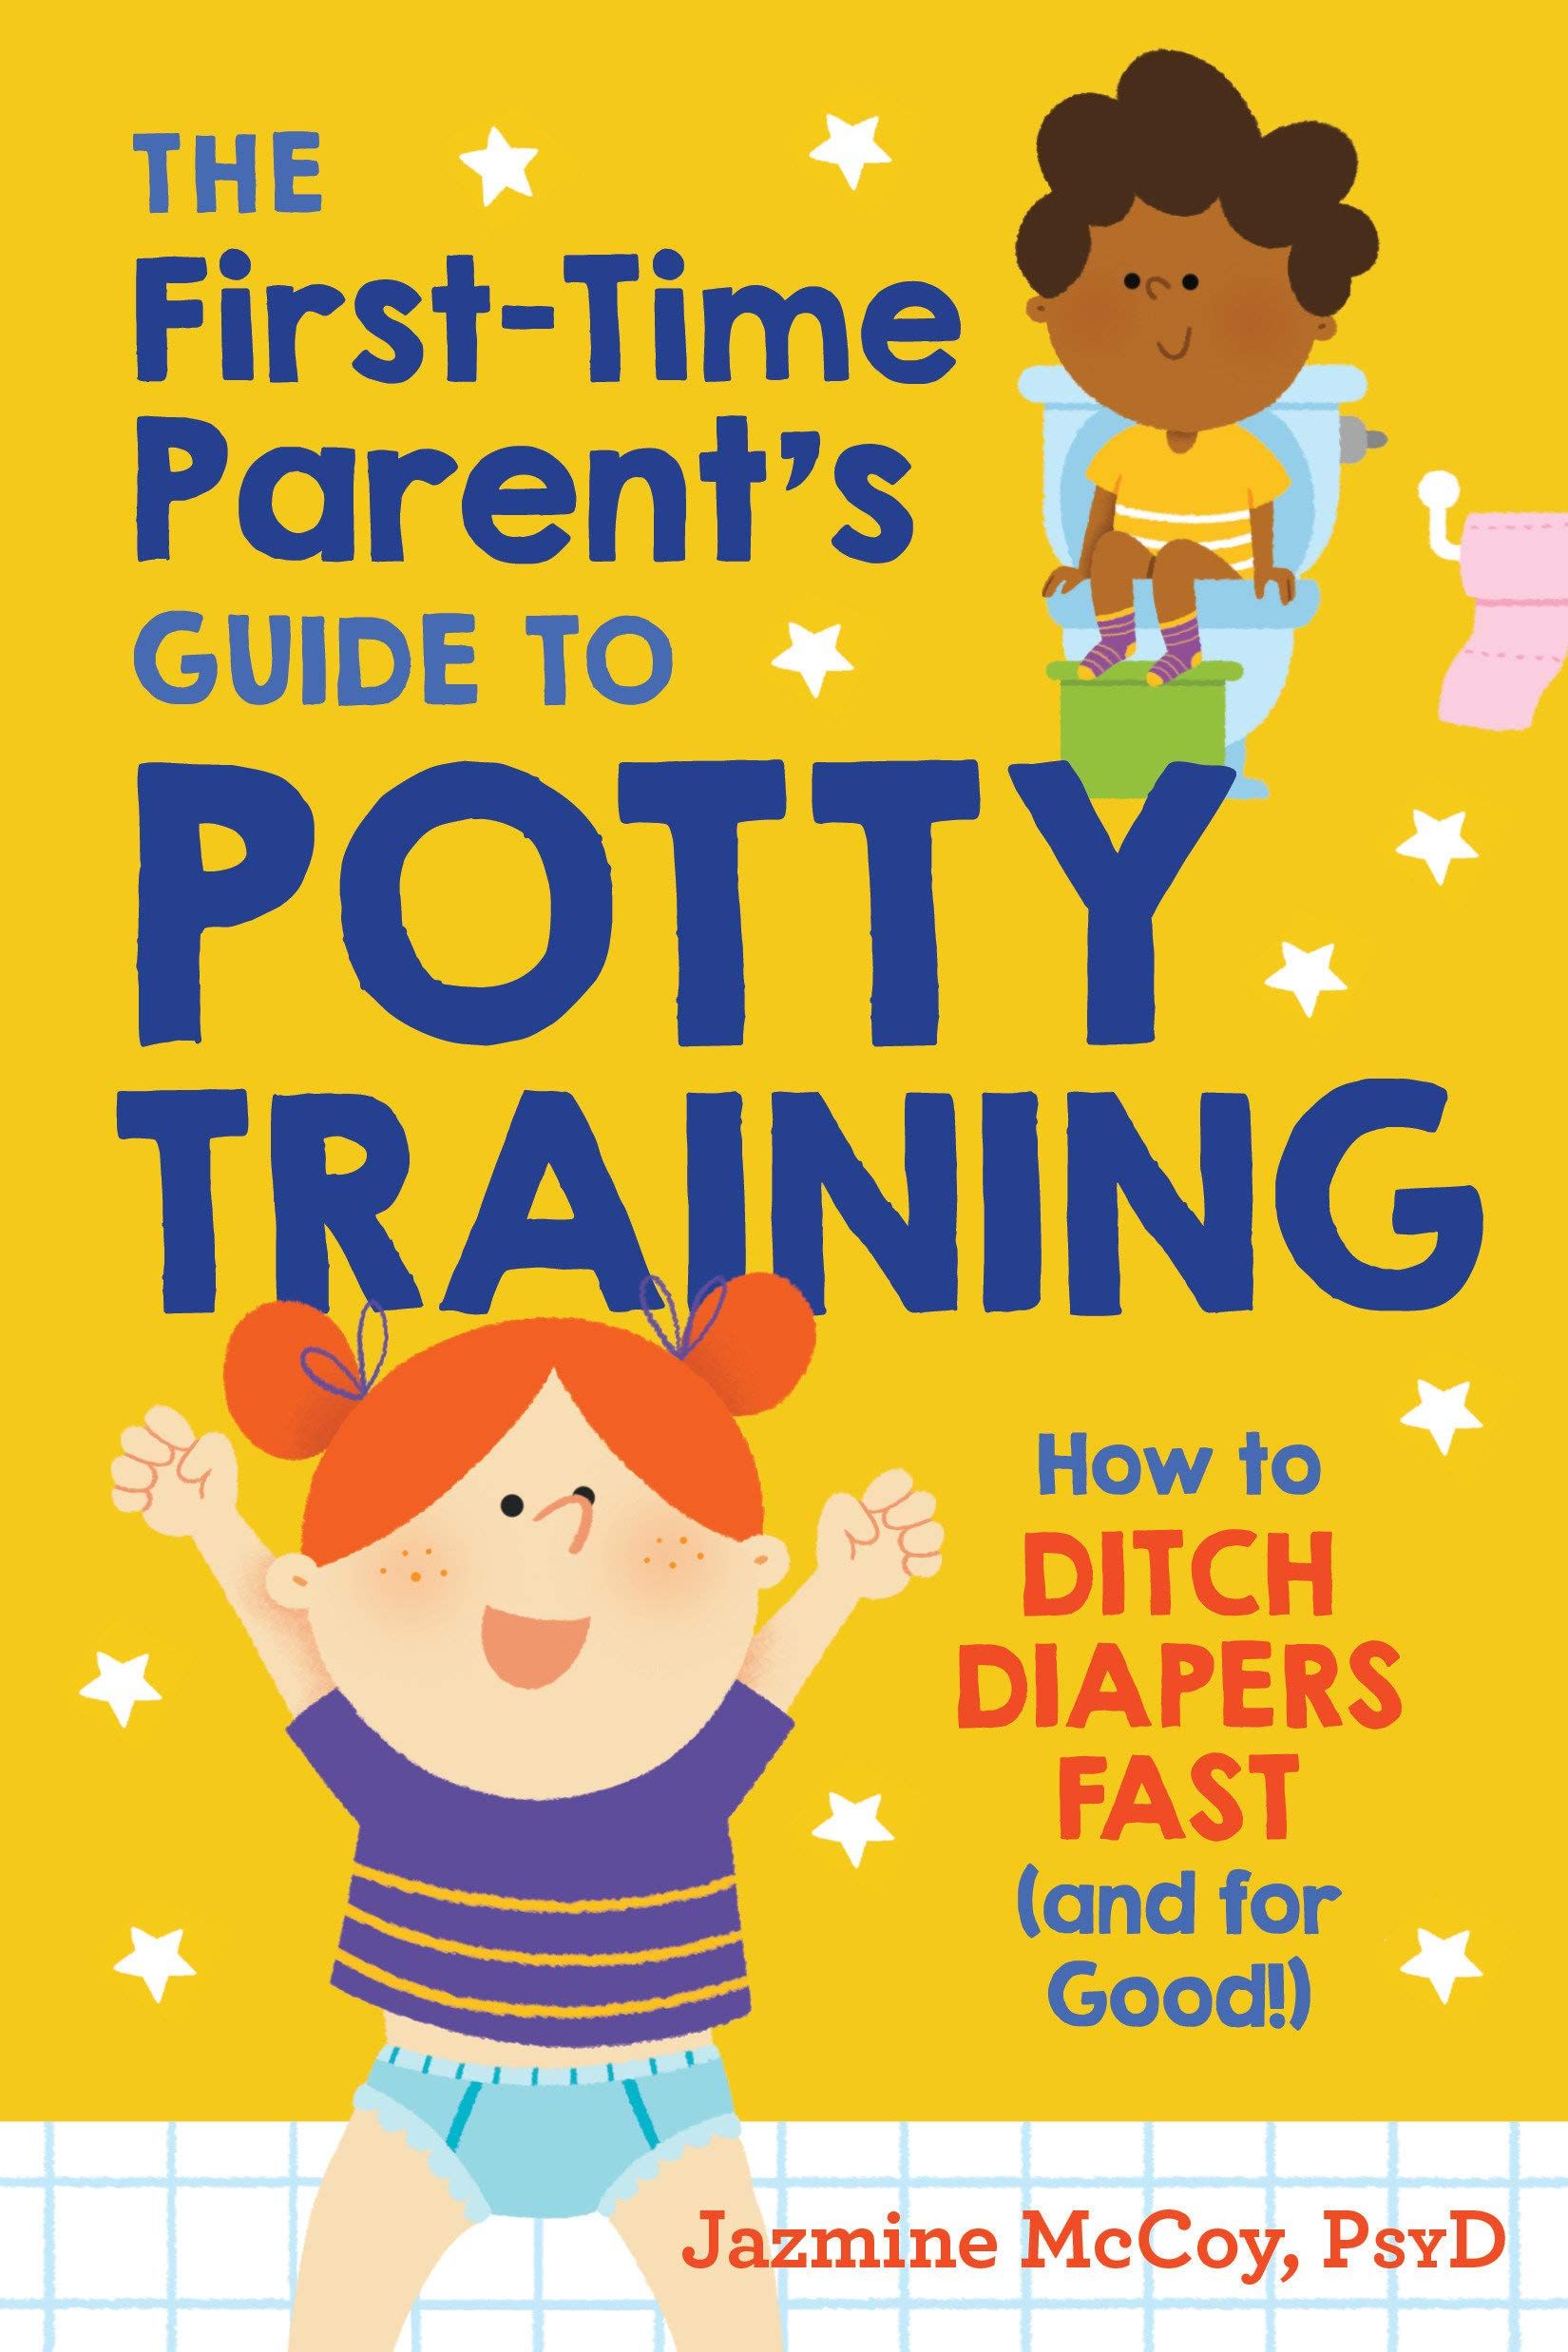 the cover of The First Time Parent’s Guide to Potty Training